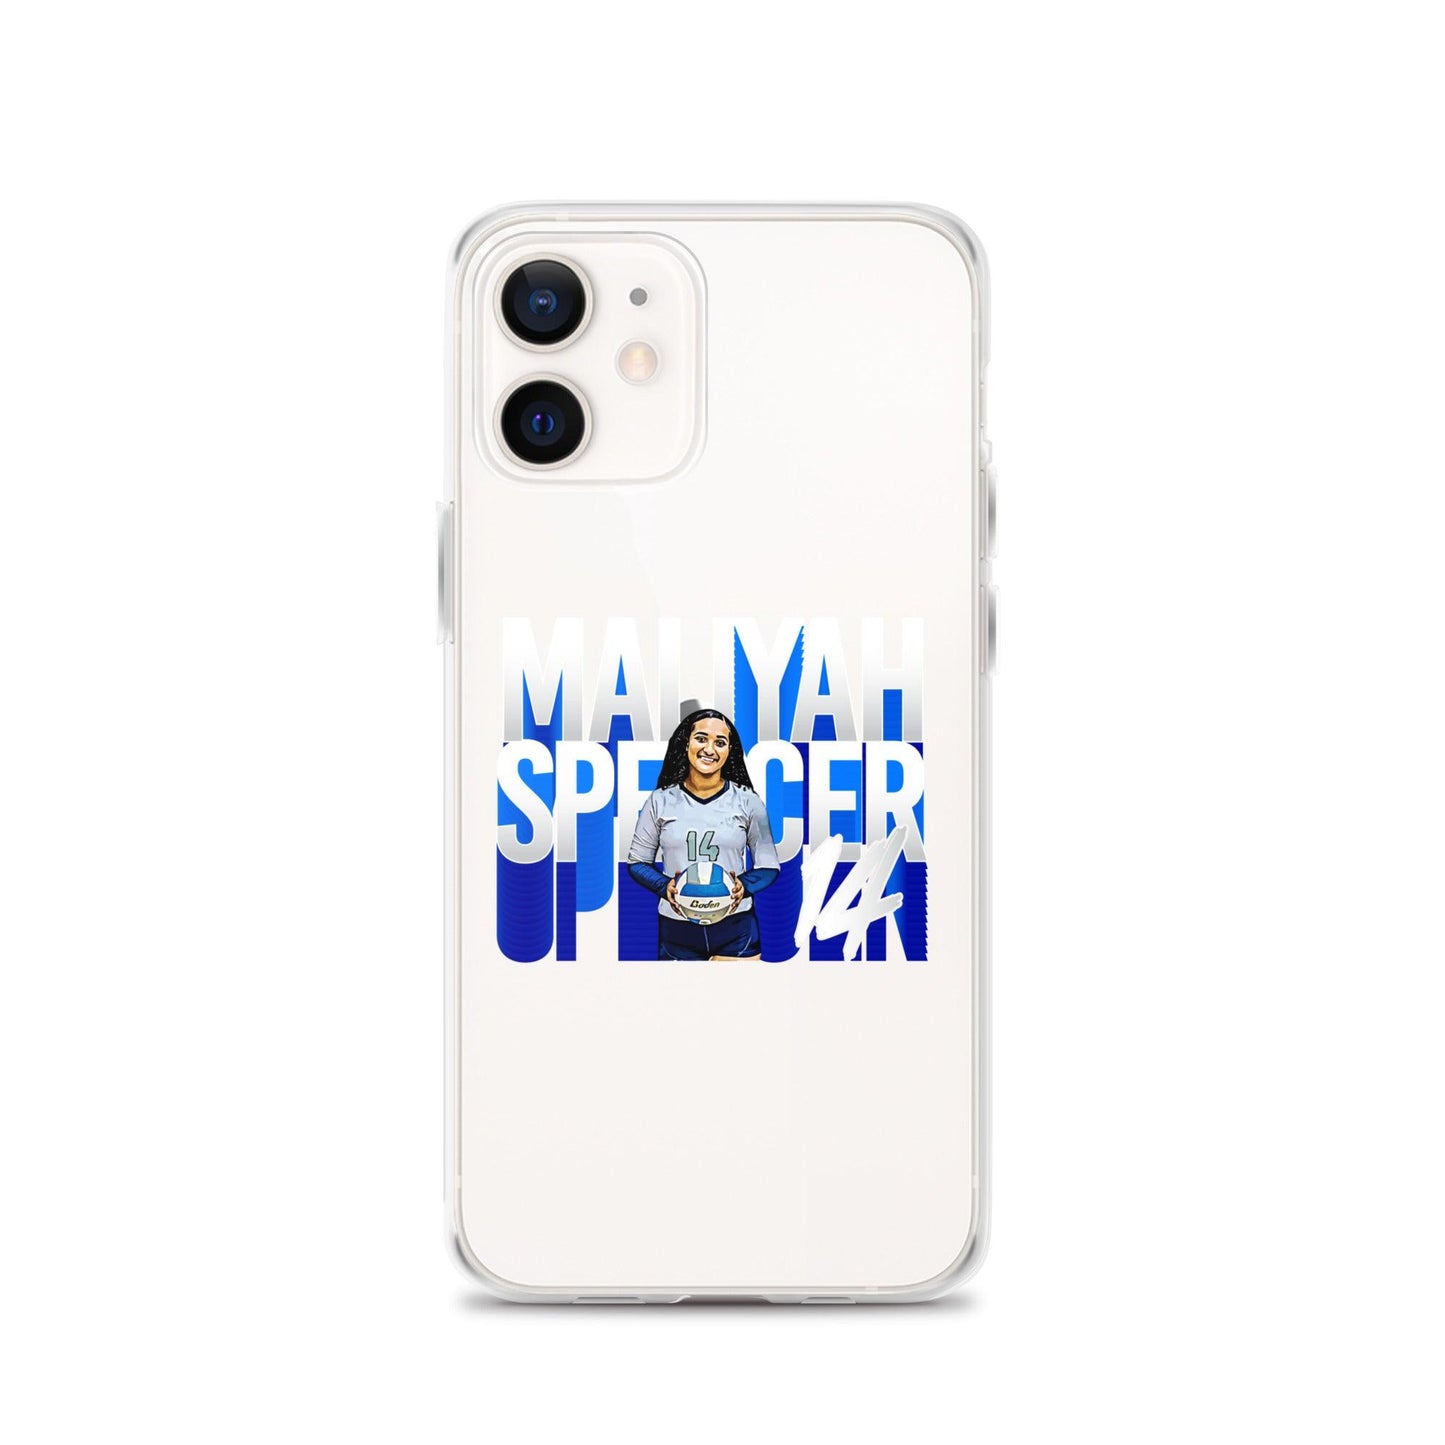 Maliyah Spencer "Gameday" iPhone Case - Fan Arch